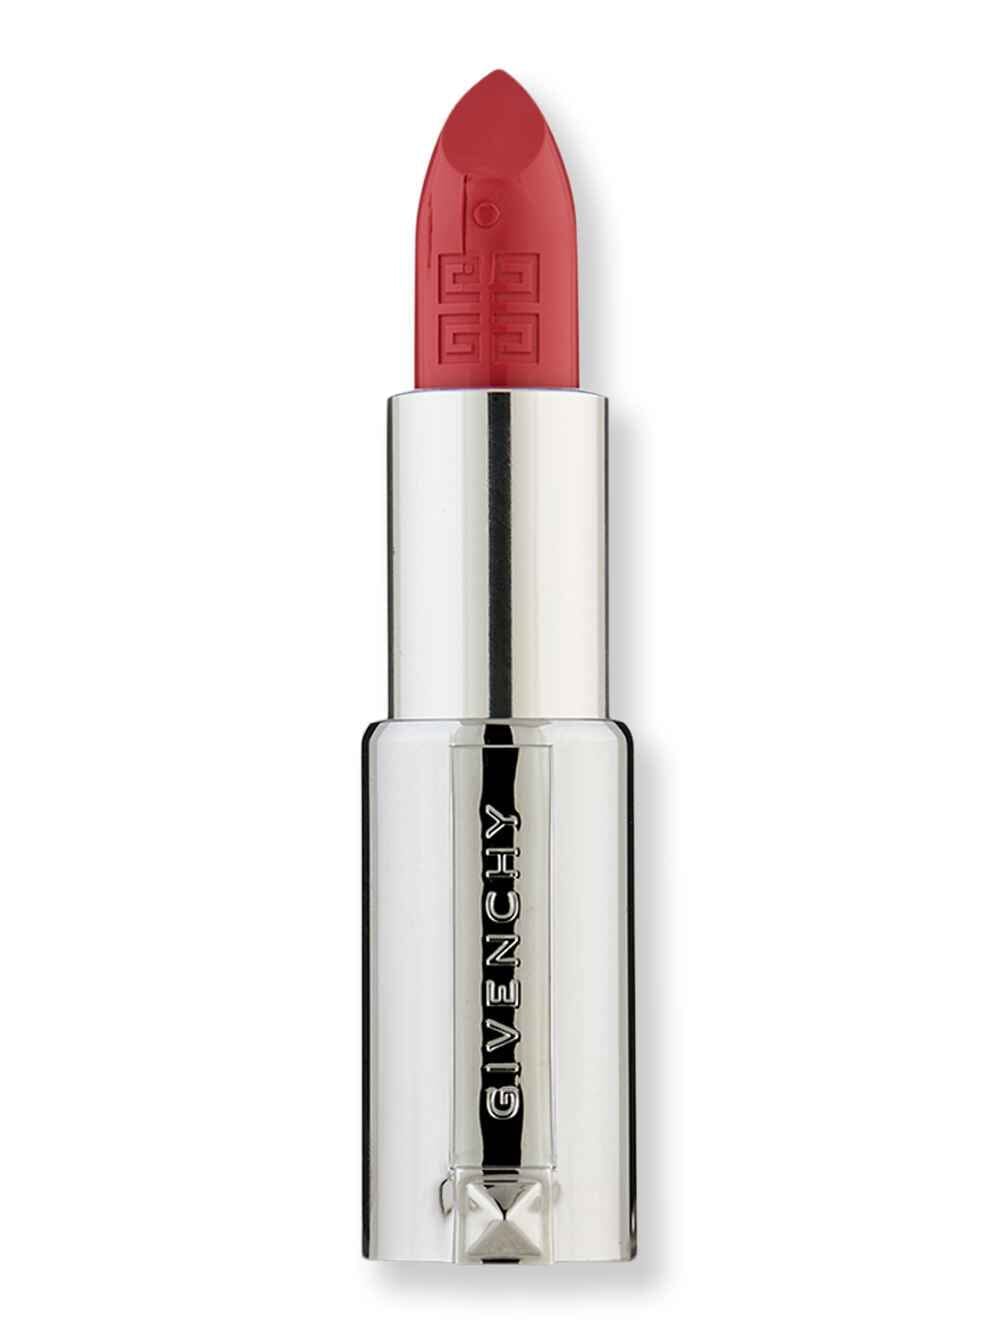 Givenchy Givenchy Genuine Leather Le Rouge Mat Lip Color .12 oz3.4 g201 Rose Taffetas Lipstick, Lip Gloss, & Lip Liners 